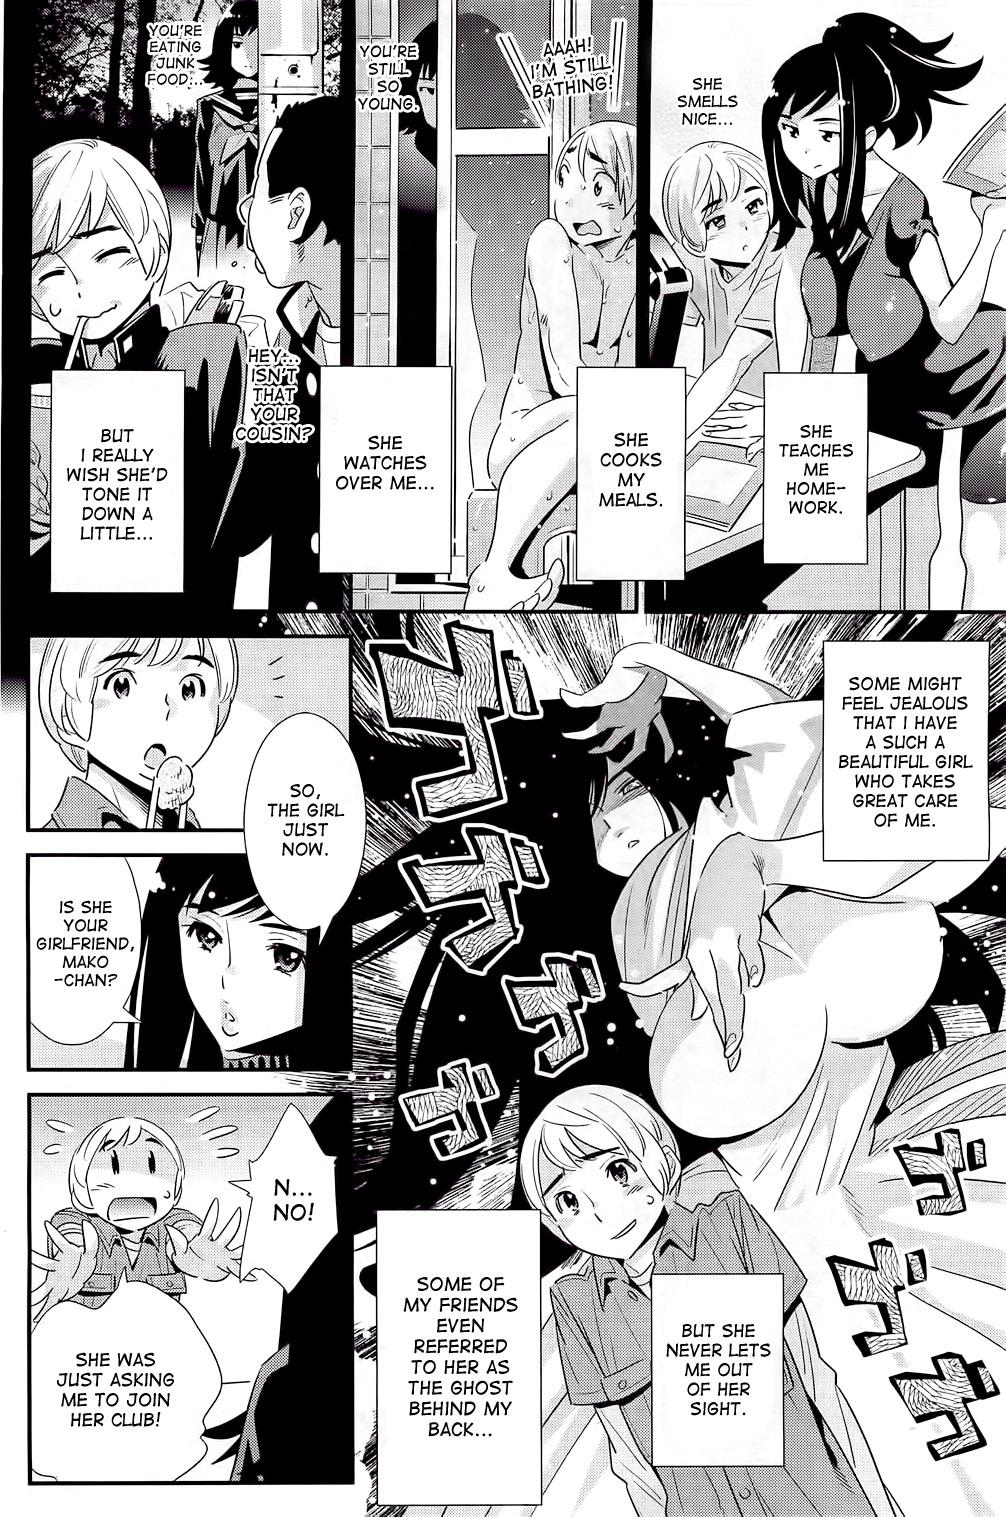 Asian Boku no Haigorei? | The Ghost Behind My Back Group Sex - Page 4